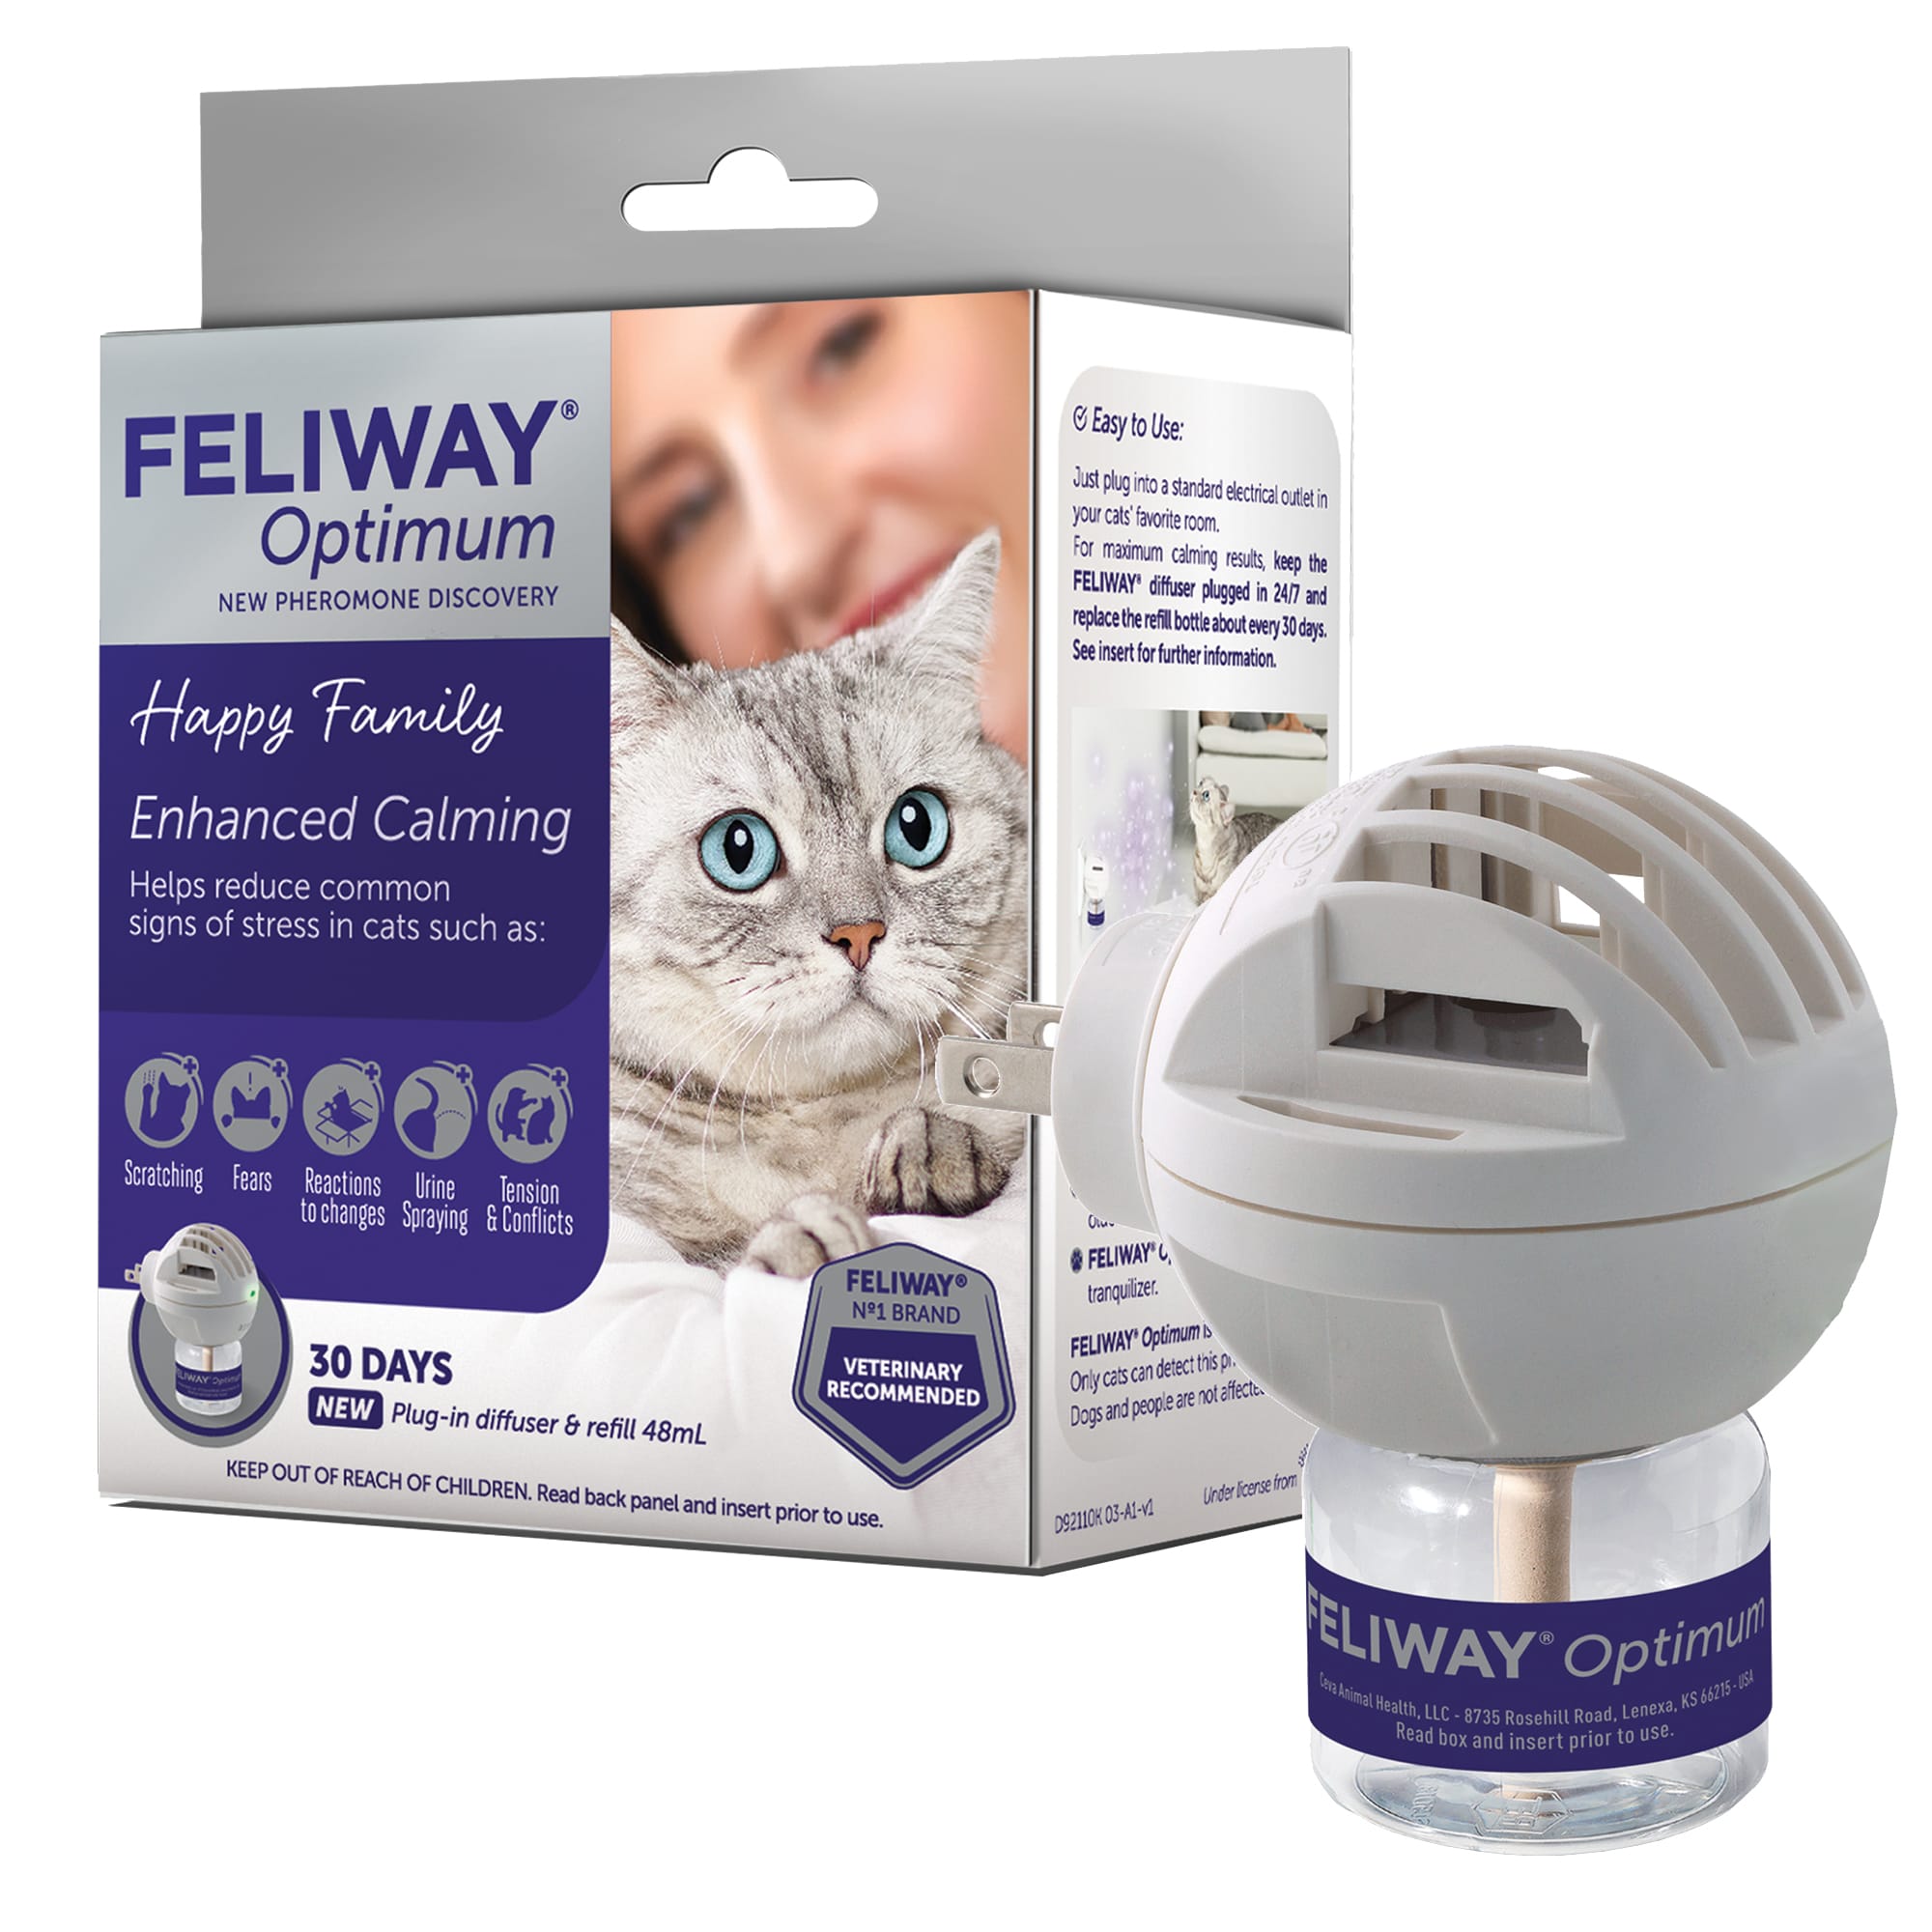 Feliway Friends Refill for Cats